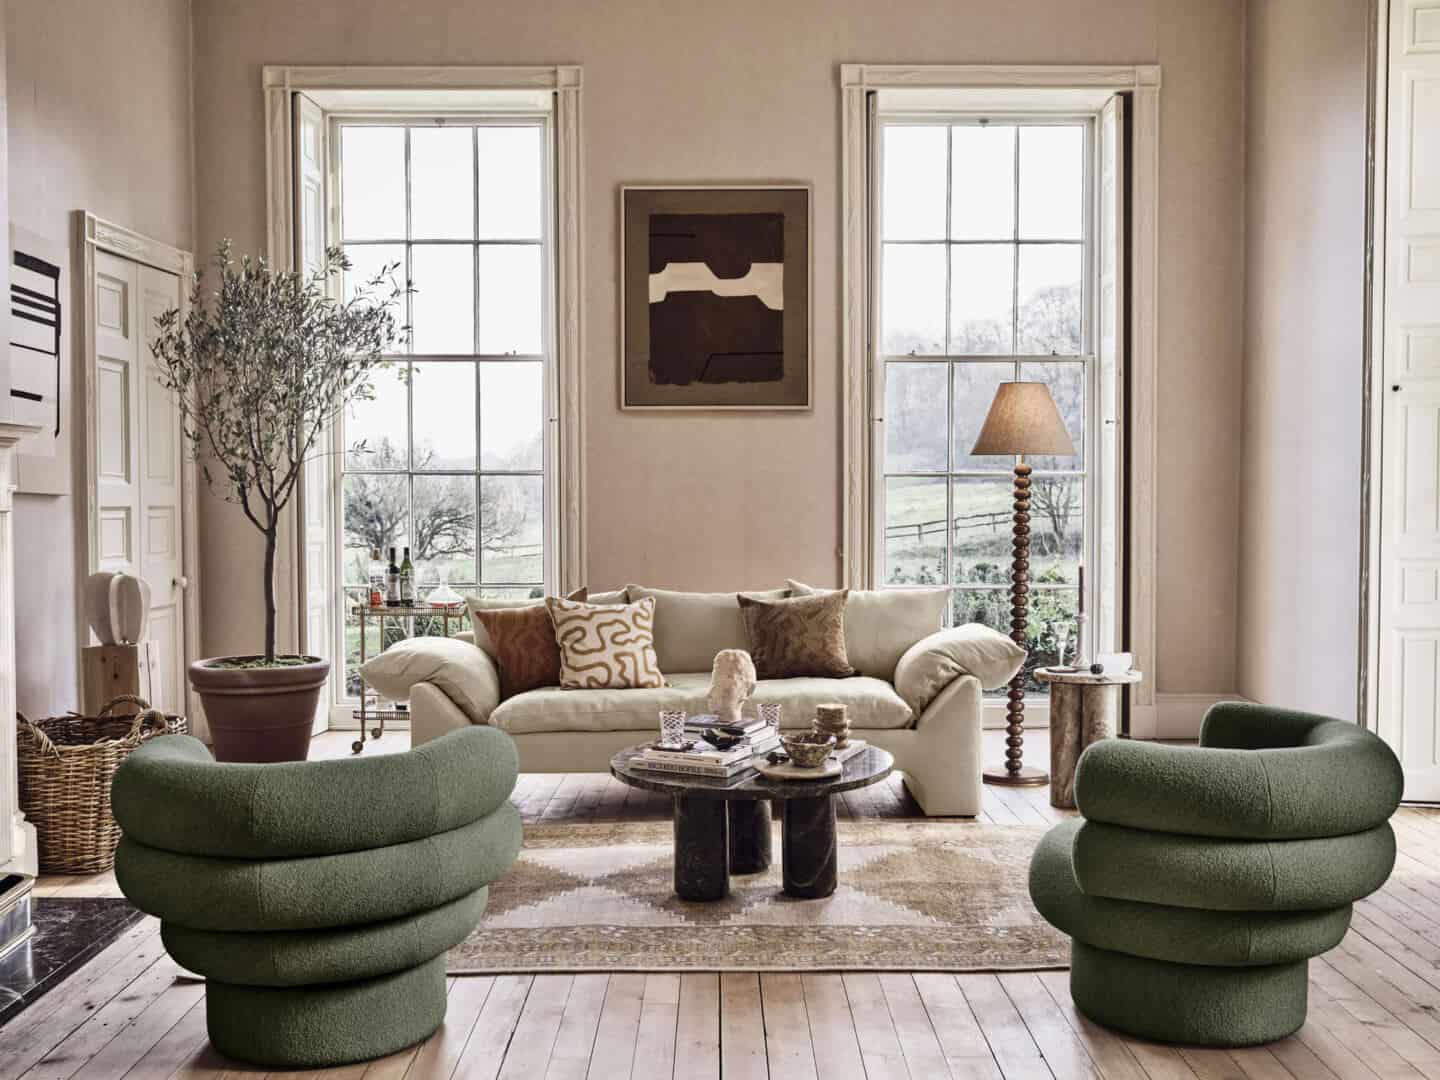 A living room with high ceilings, huge windows and sculptural furniture in green and cream from Soho Home